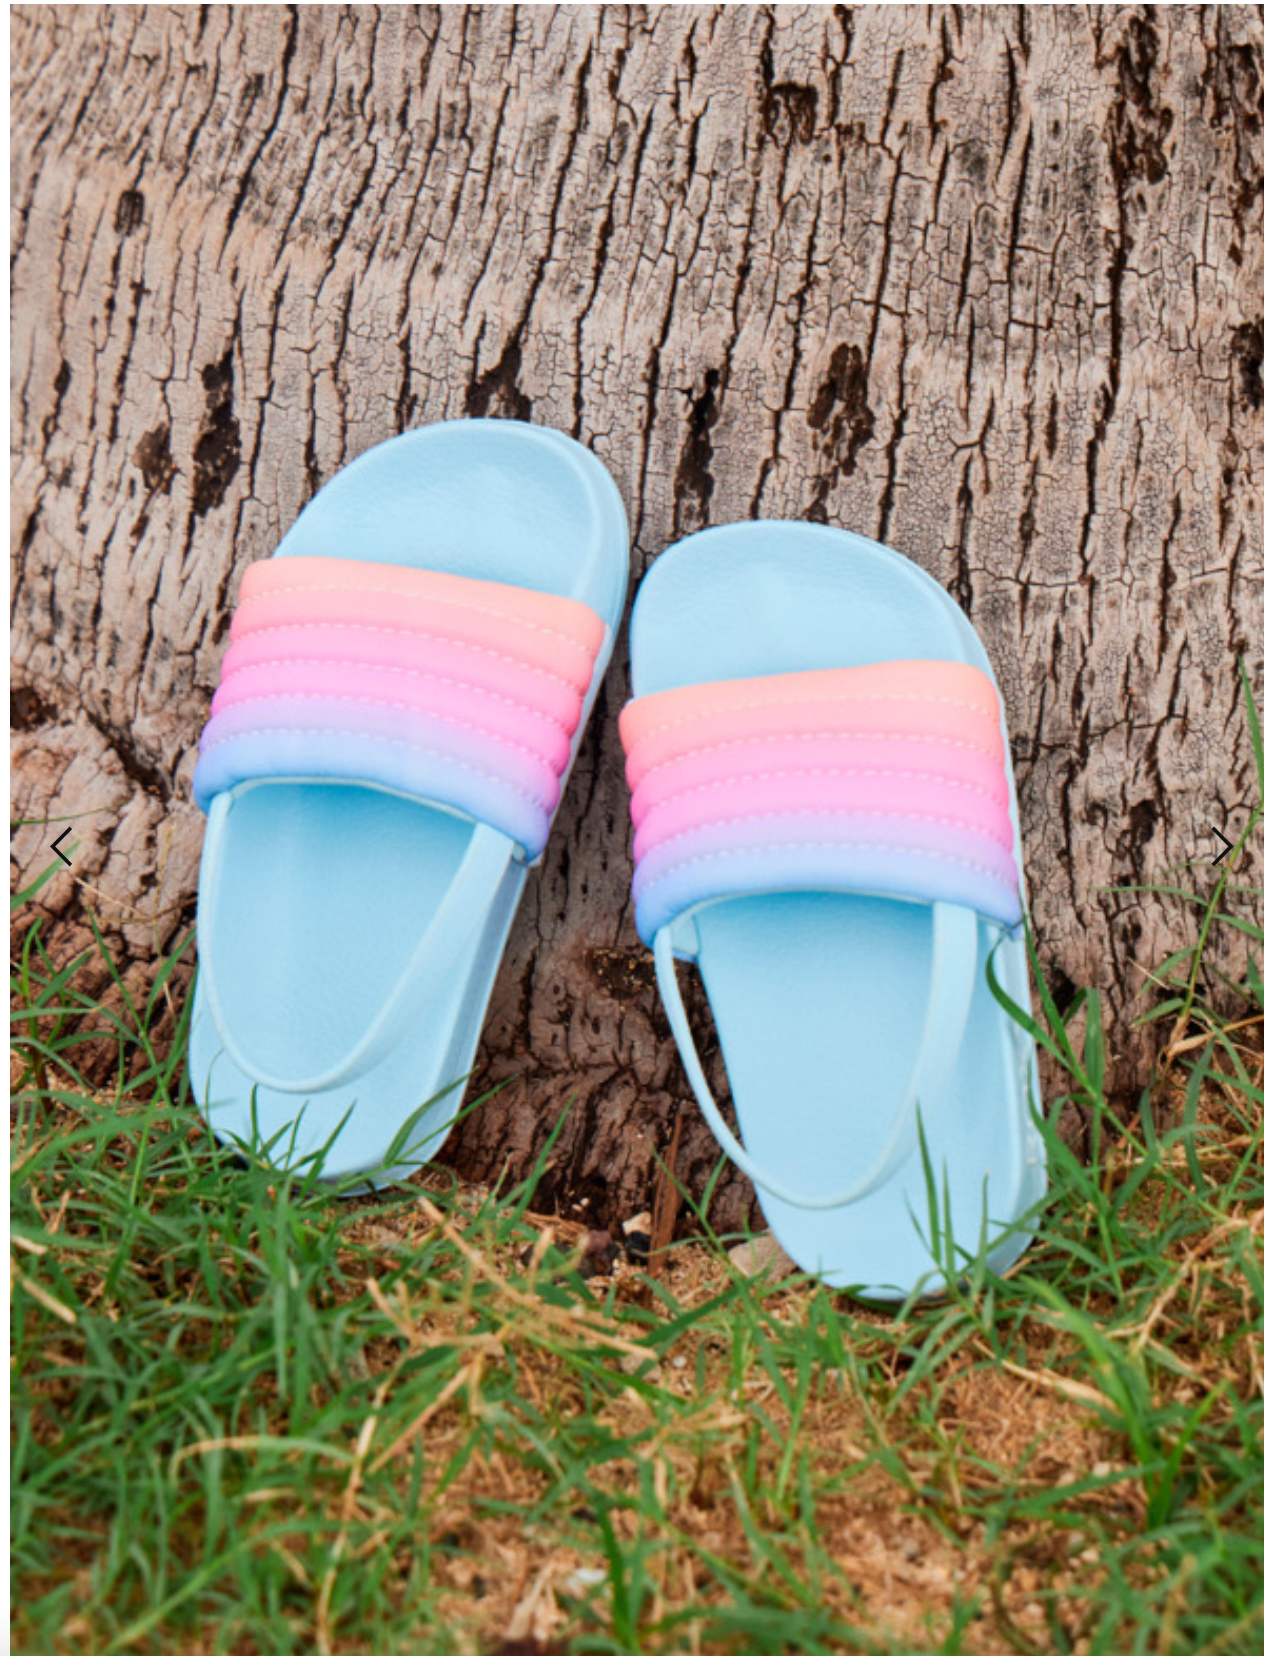 ROXY Slippy Ribbed - Sandals for Toddlers